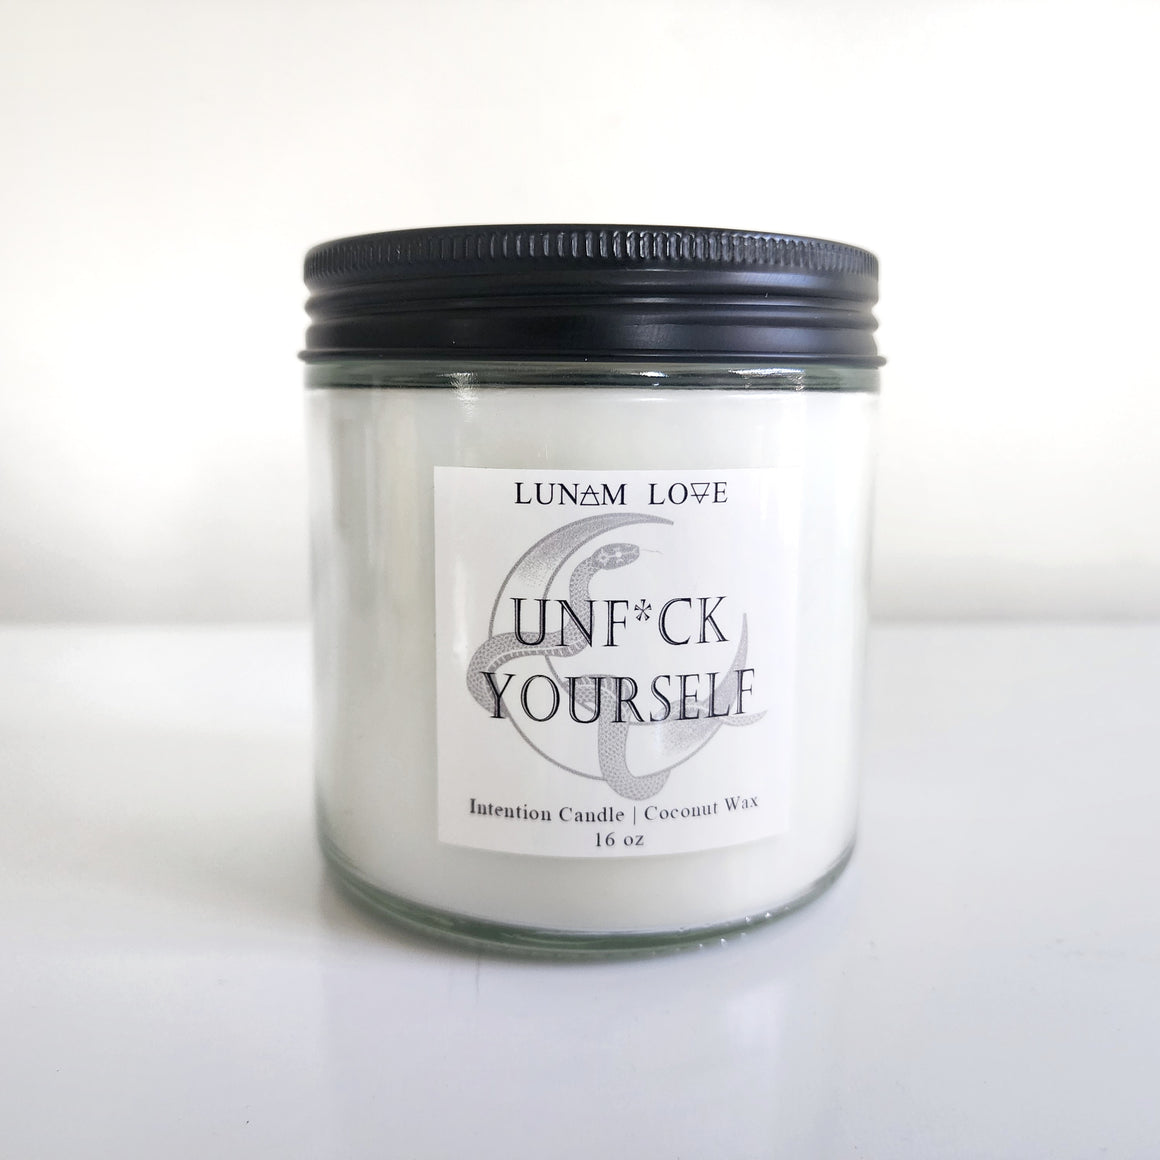 Unf*ck Yourself Candle